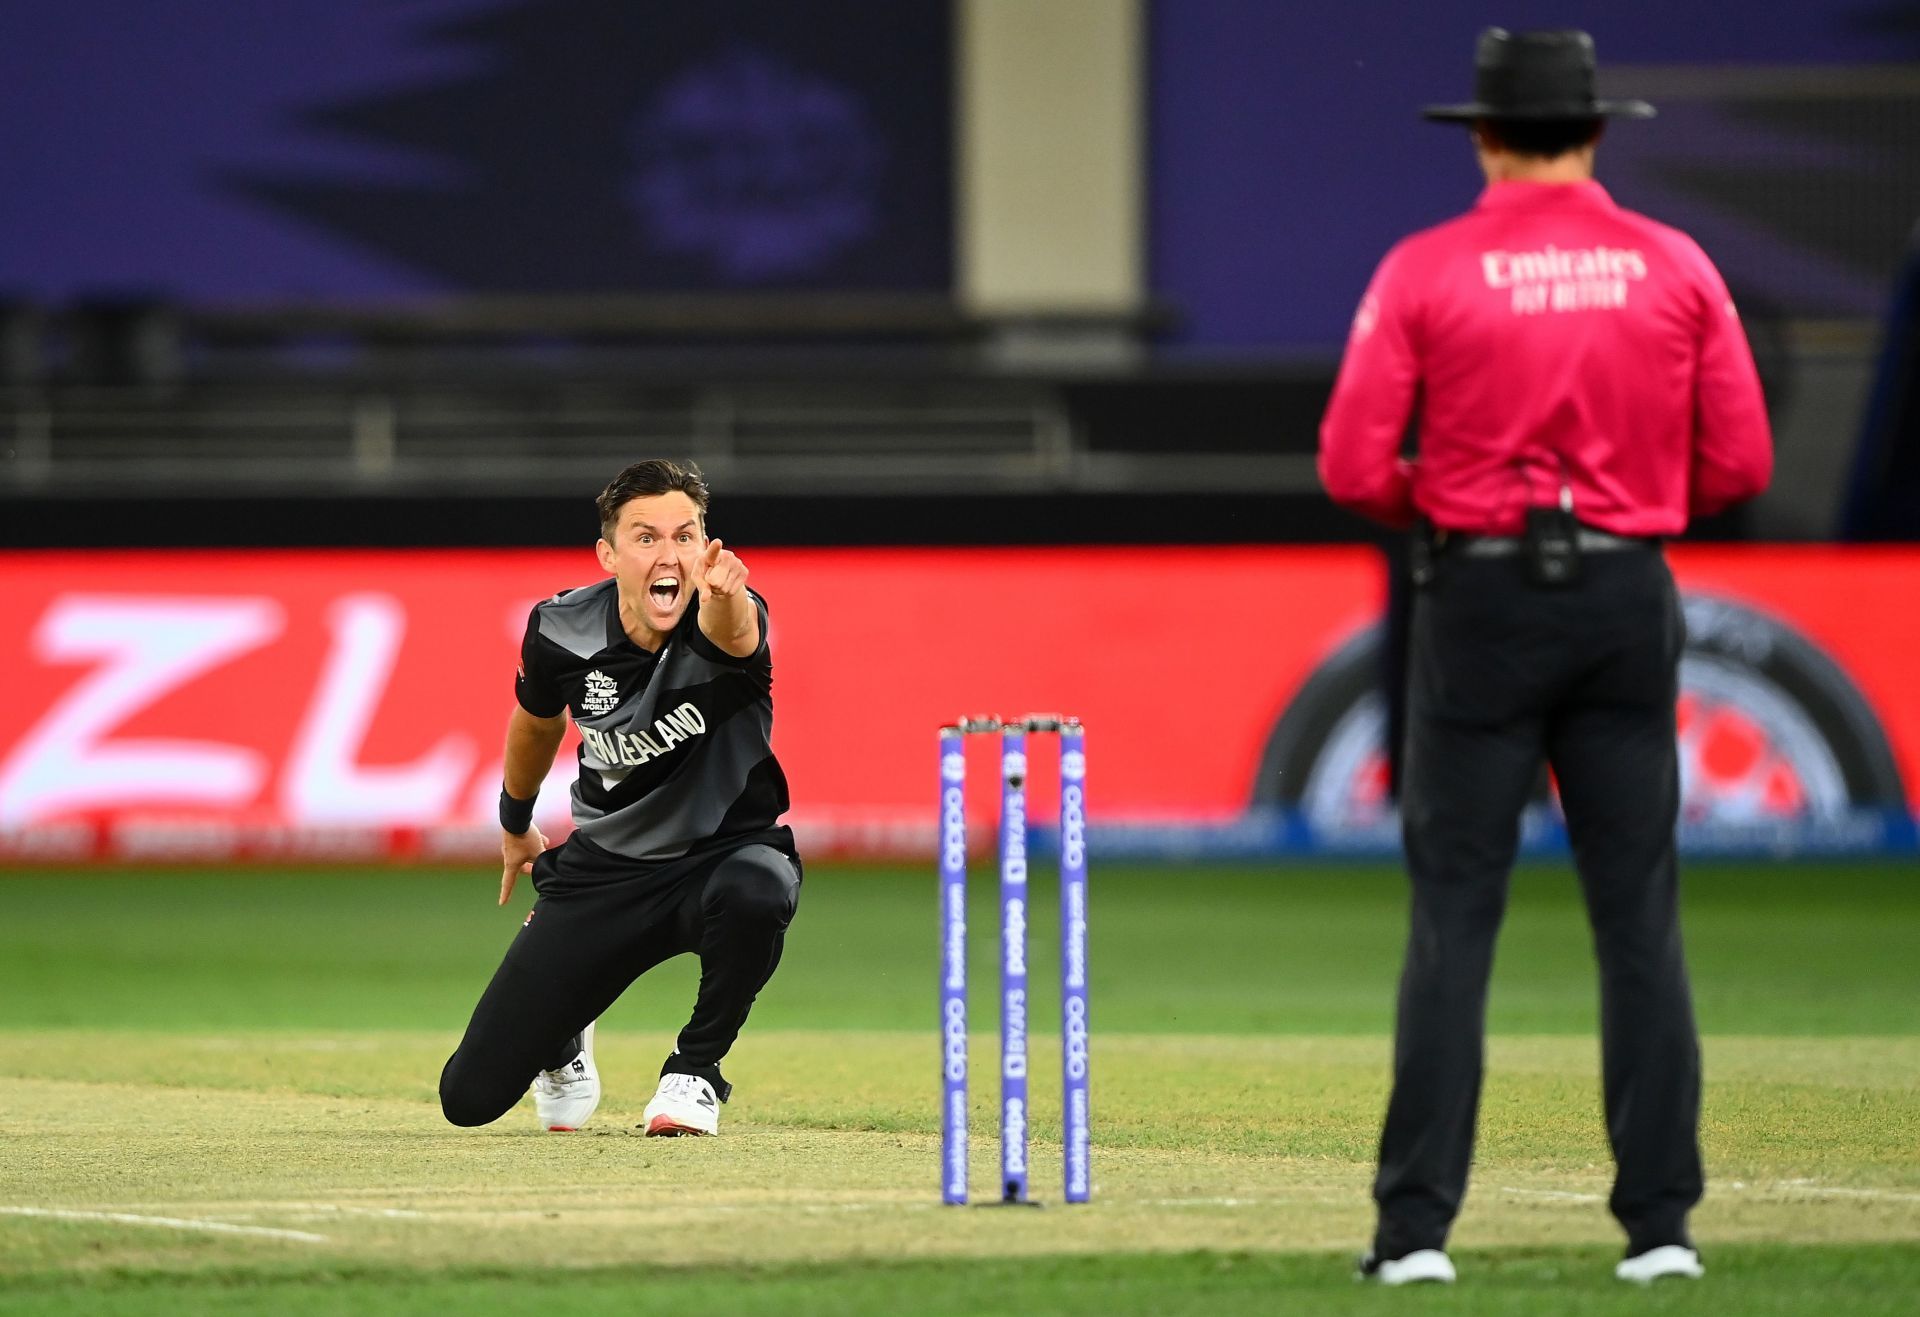 Trent Boult is one of the marquee players in the upcoming auction